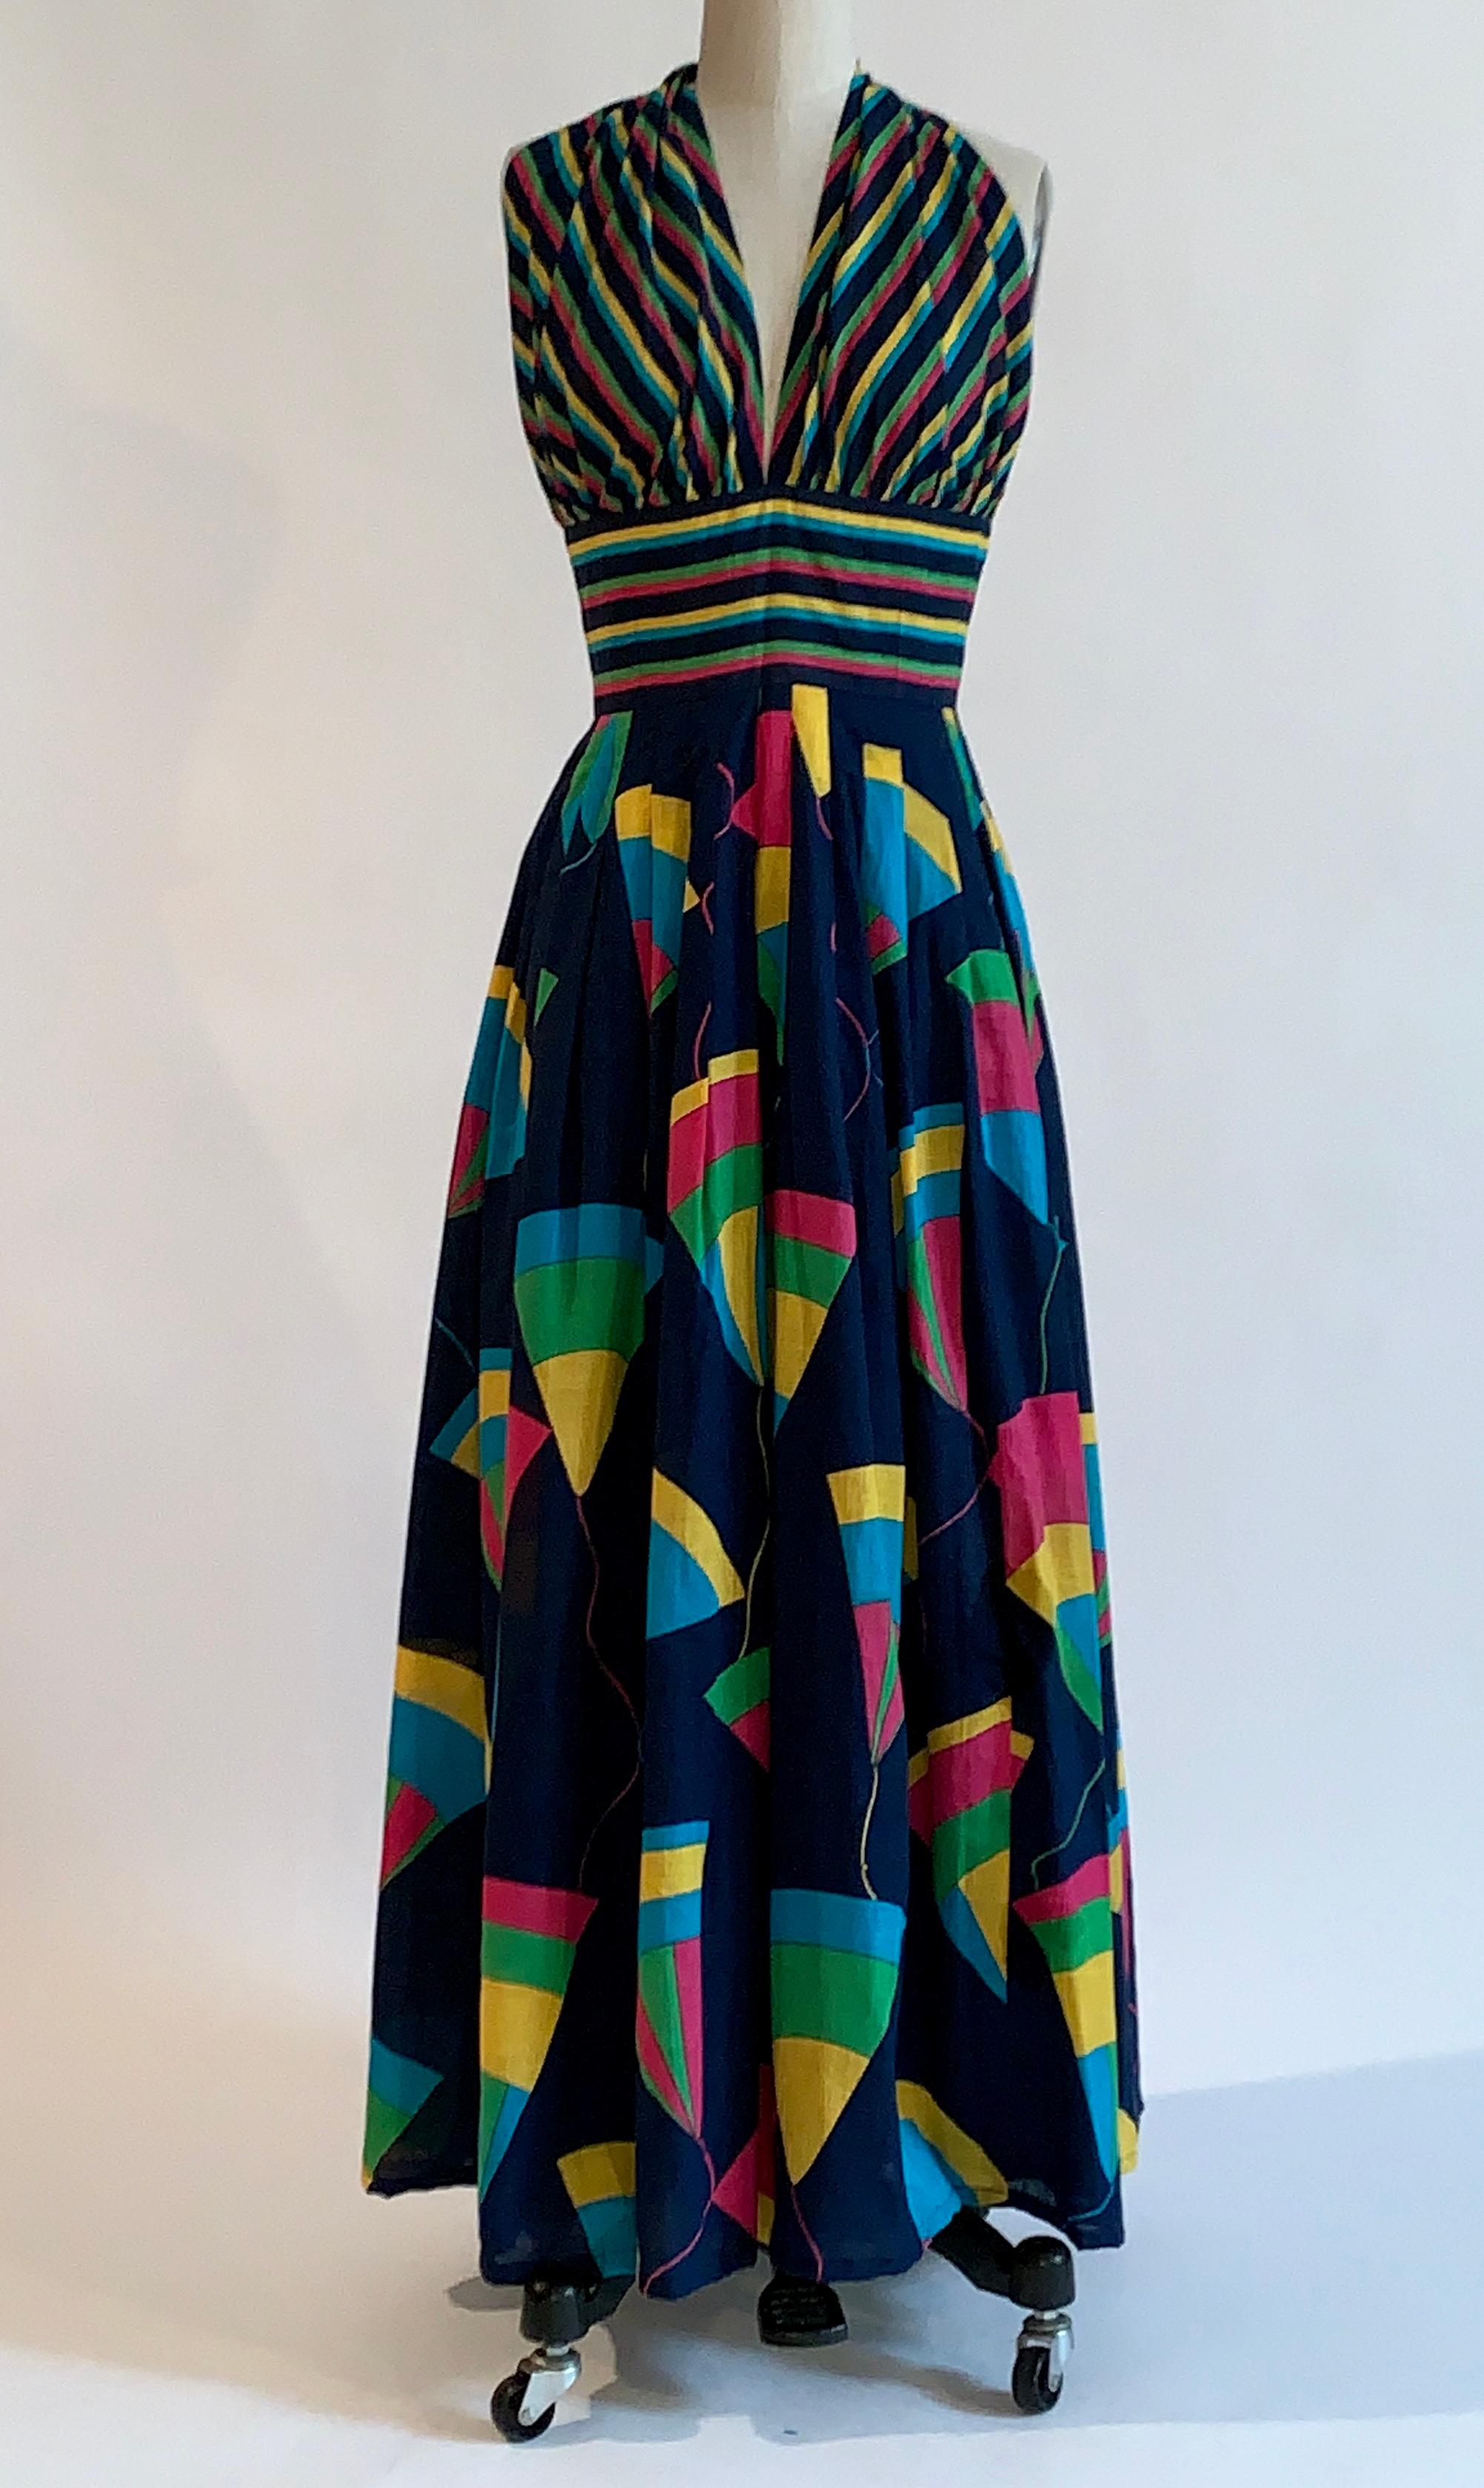 Jean Patou vintage 1970s maxi length sundress featuring navy, turquoise, pink, yellow and green stripes at halter top and geometric print at skirt. Back zip and hook. 

Content not listed, feels like cotton.
Lined from waist to hem.

Made in